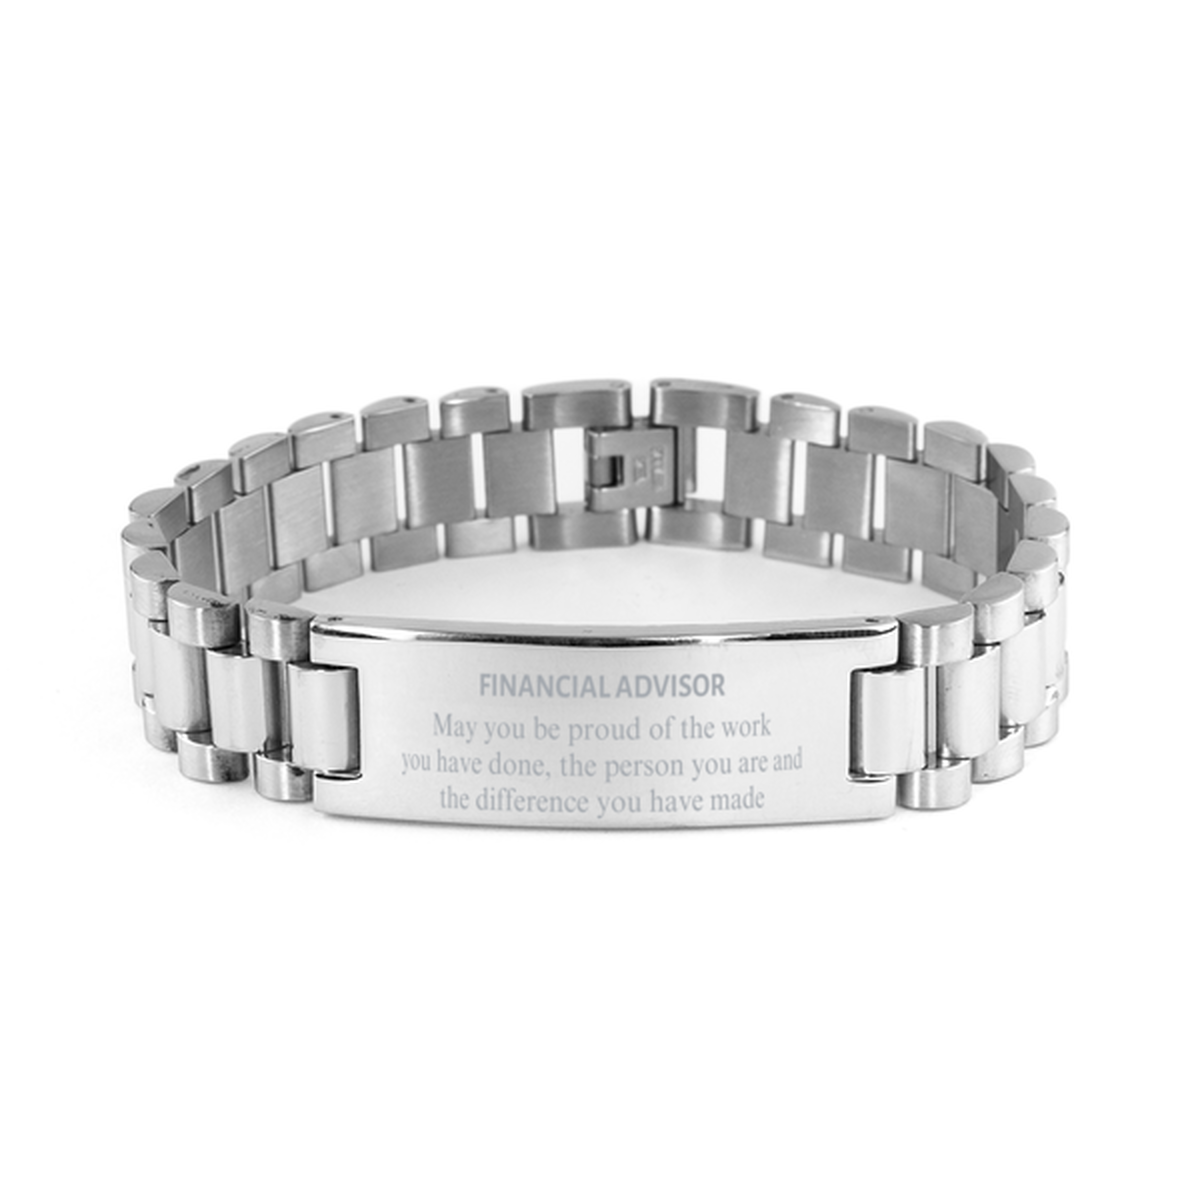 Financial Advisor May you be proud of the work you have done, Retirement Financial Advisor Ladder Stainless Steel Bracelet for Colleague Appreciation Gifts Amazing for Financial Advisor